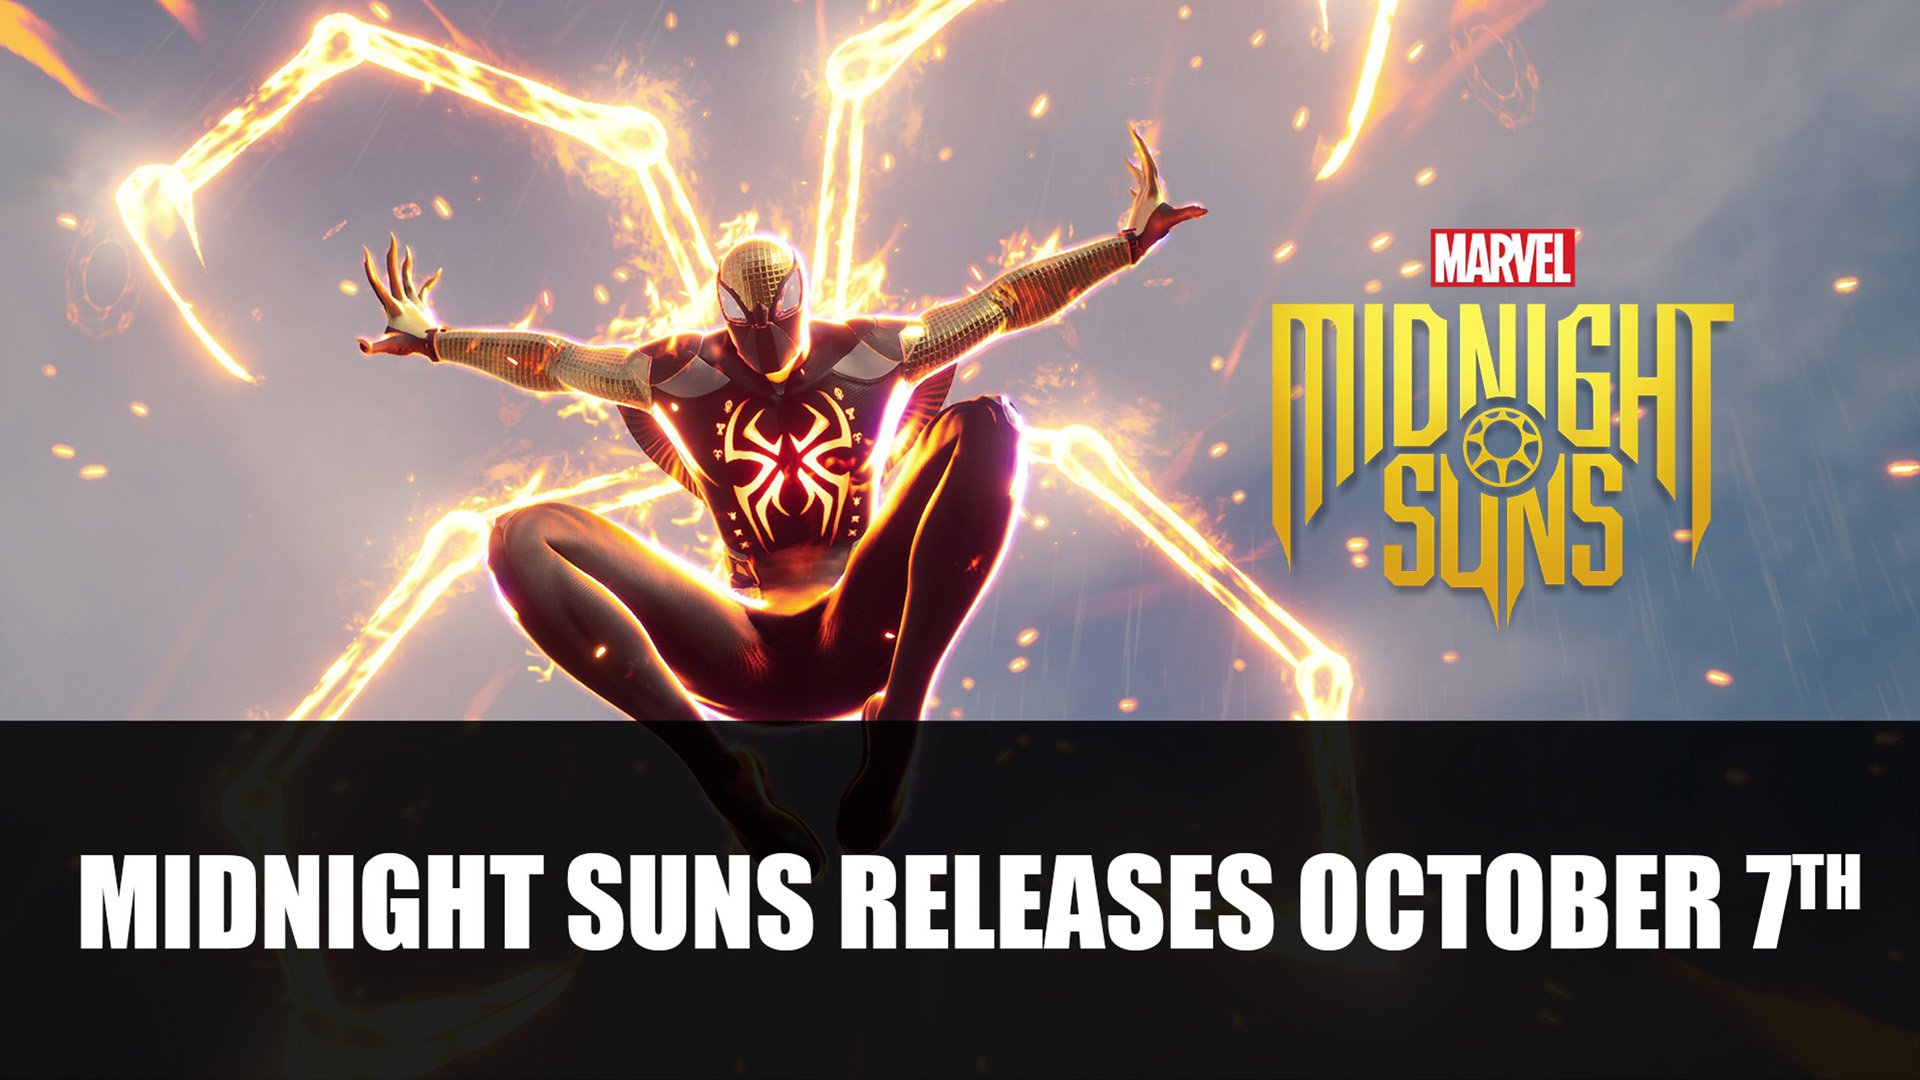 Character creation revealed 🔥 - Marvel's Midnight Suns 